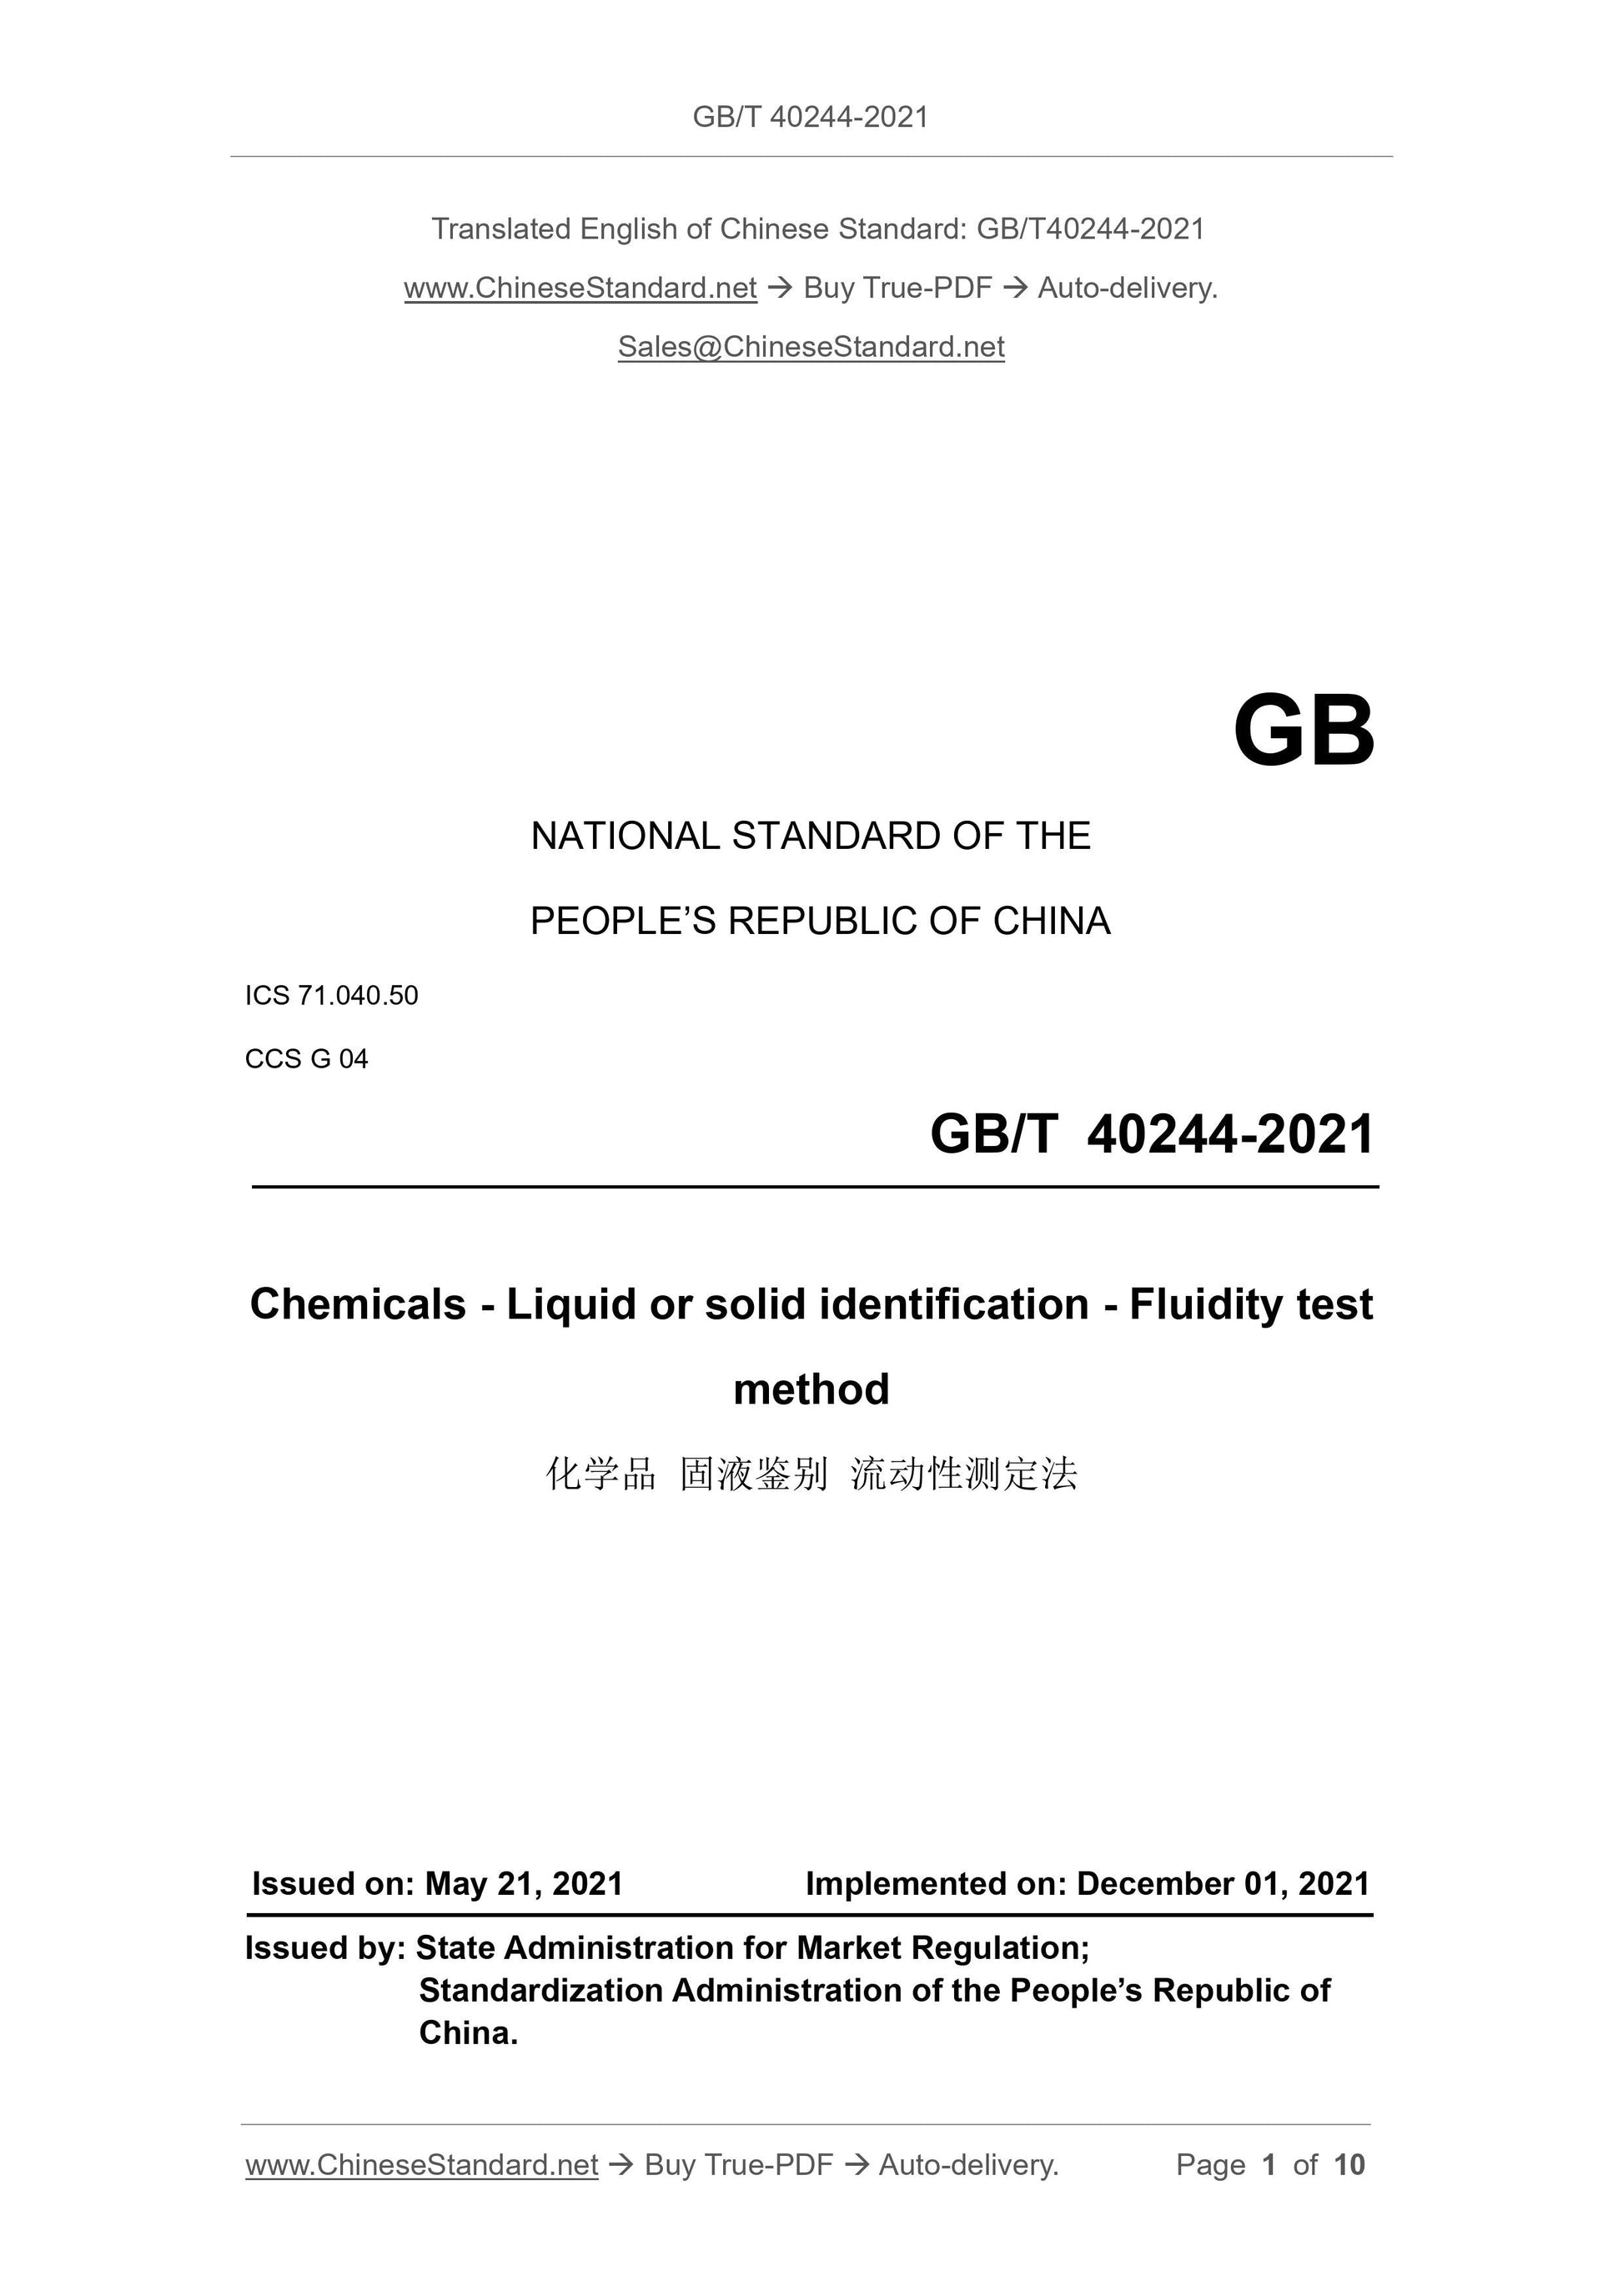 GB/T 40244-2021 Page 1